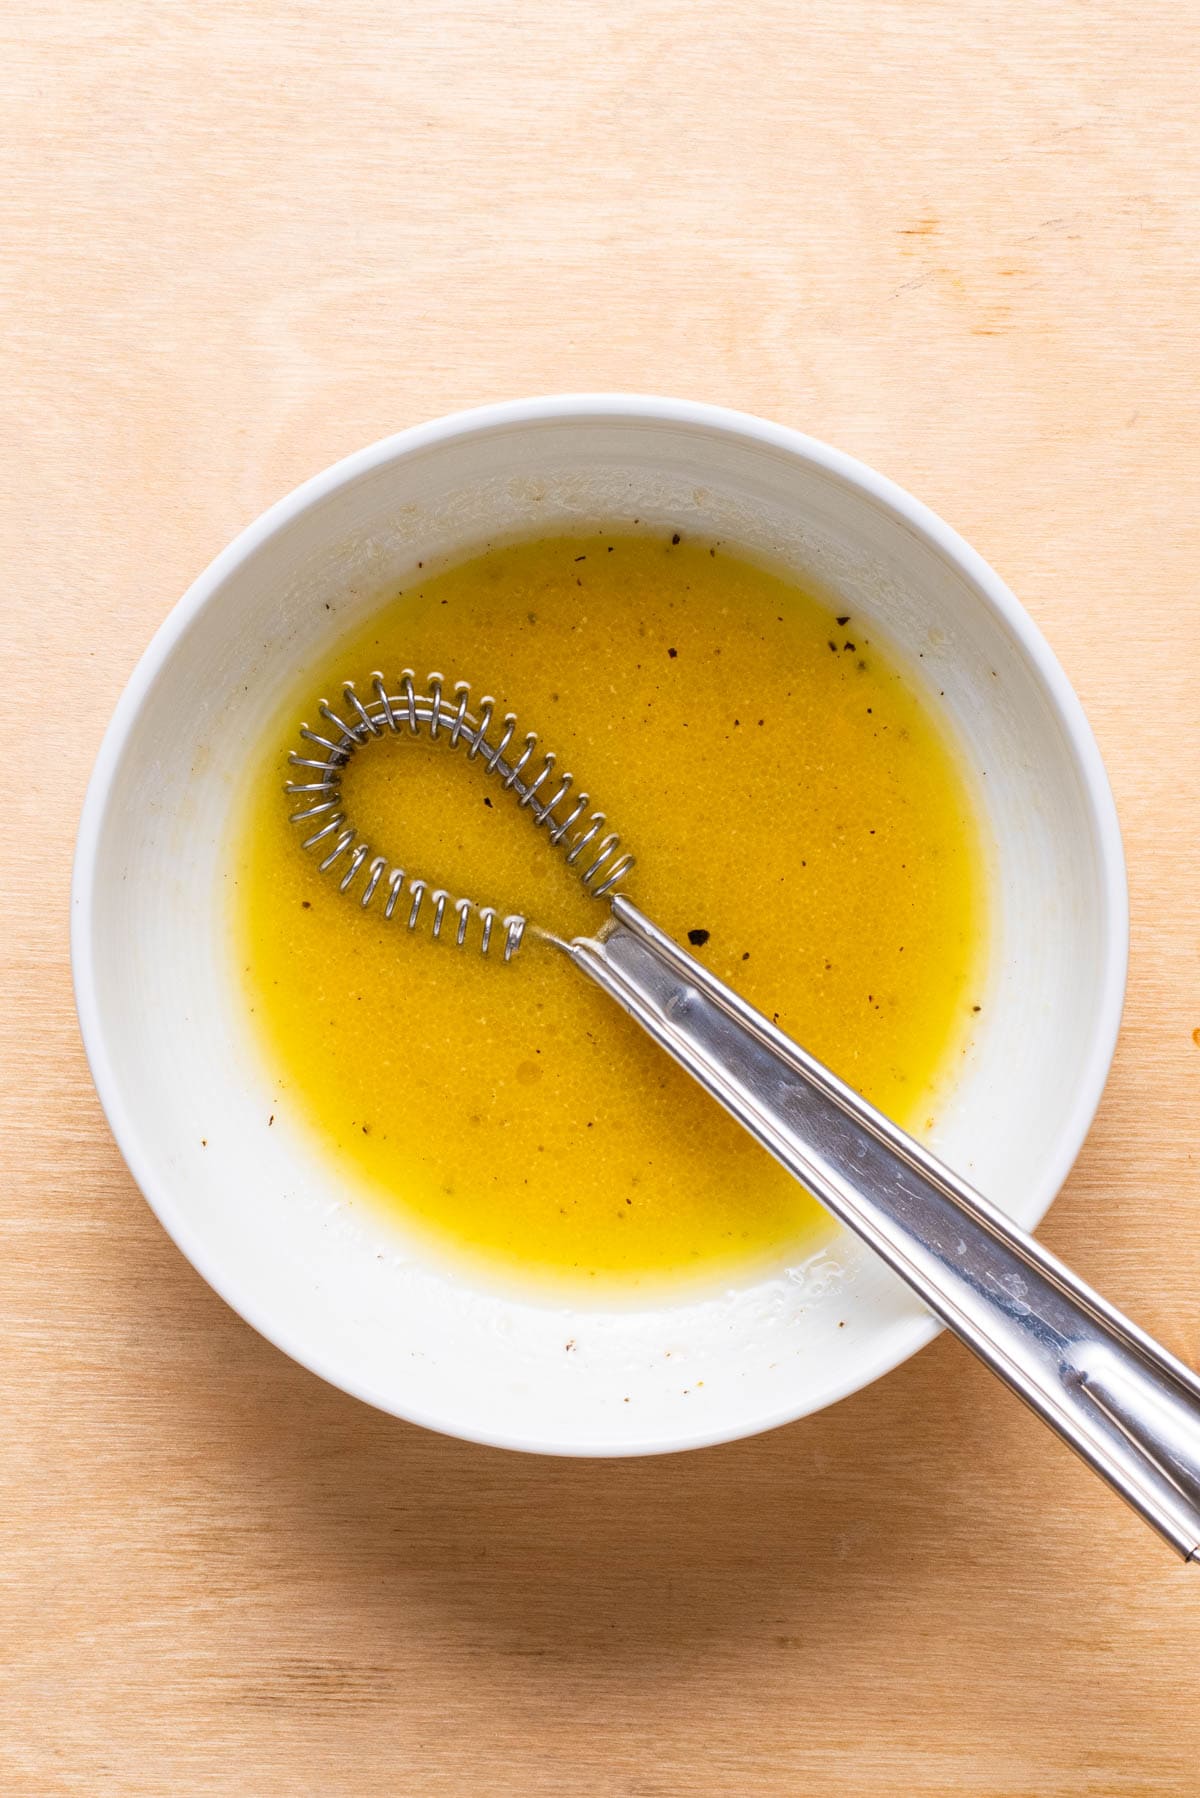 Salad dressing whisked in a bowl.